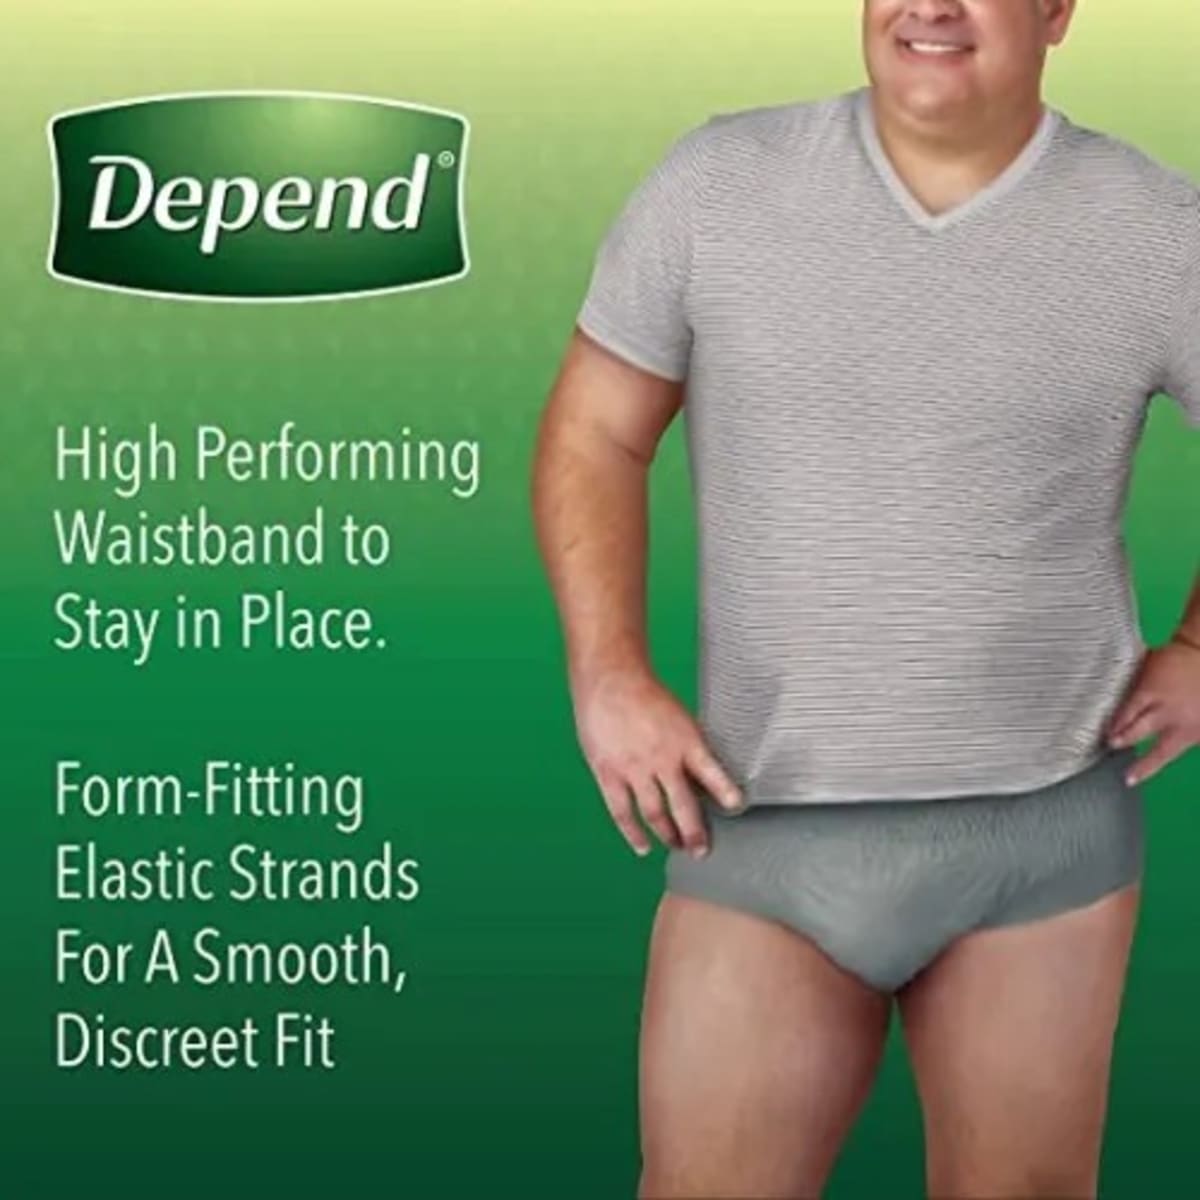 Depend Fresh Protection plus Ultimate Underwear for Men Large - 84 Count